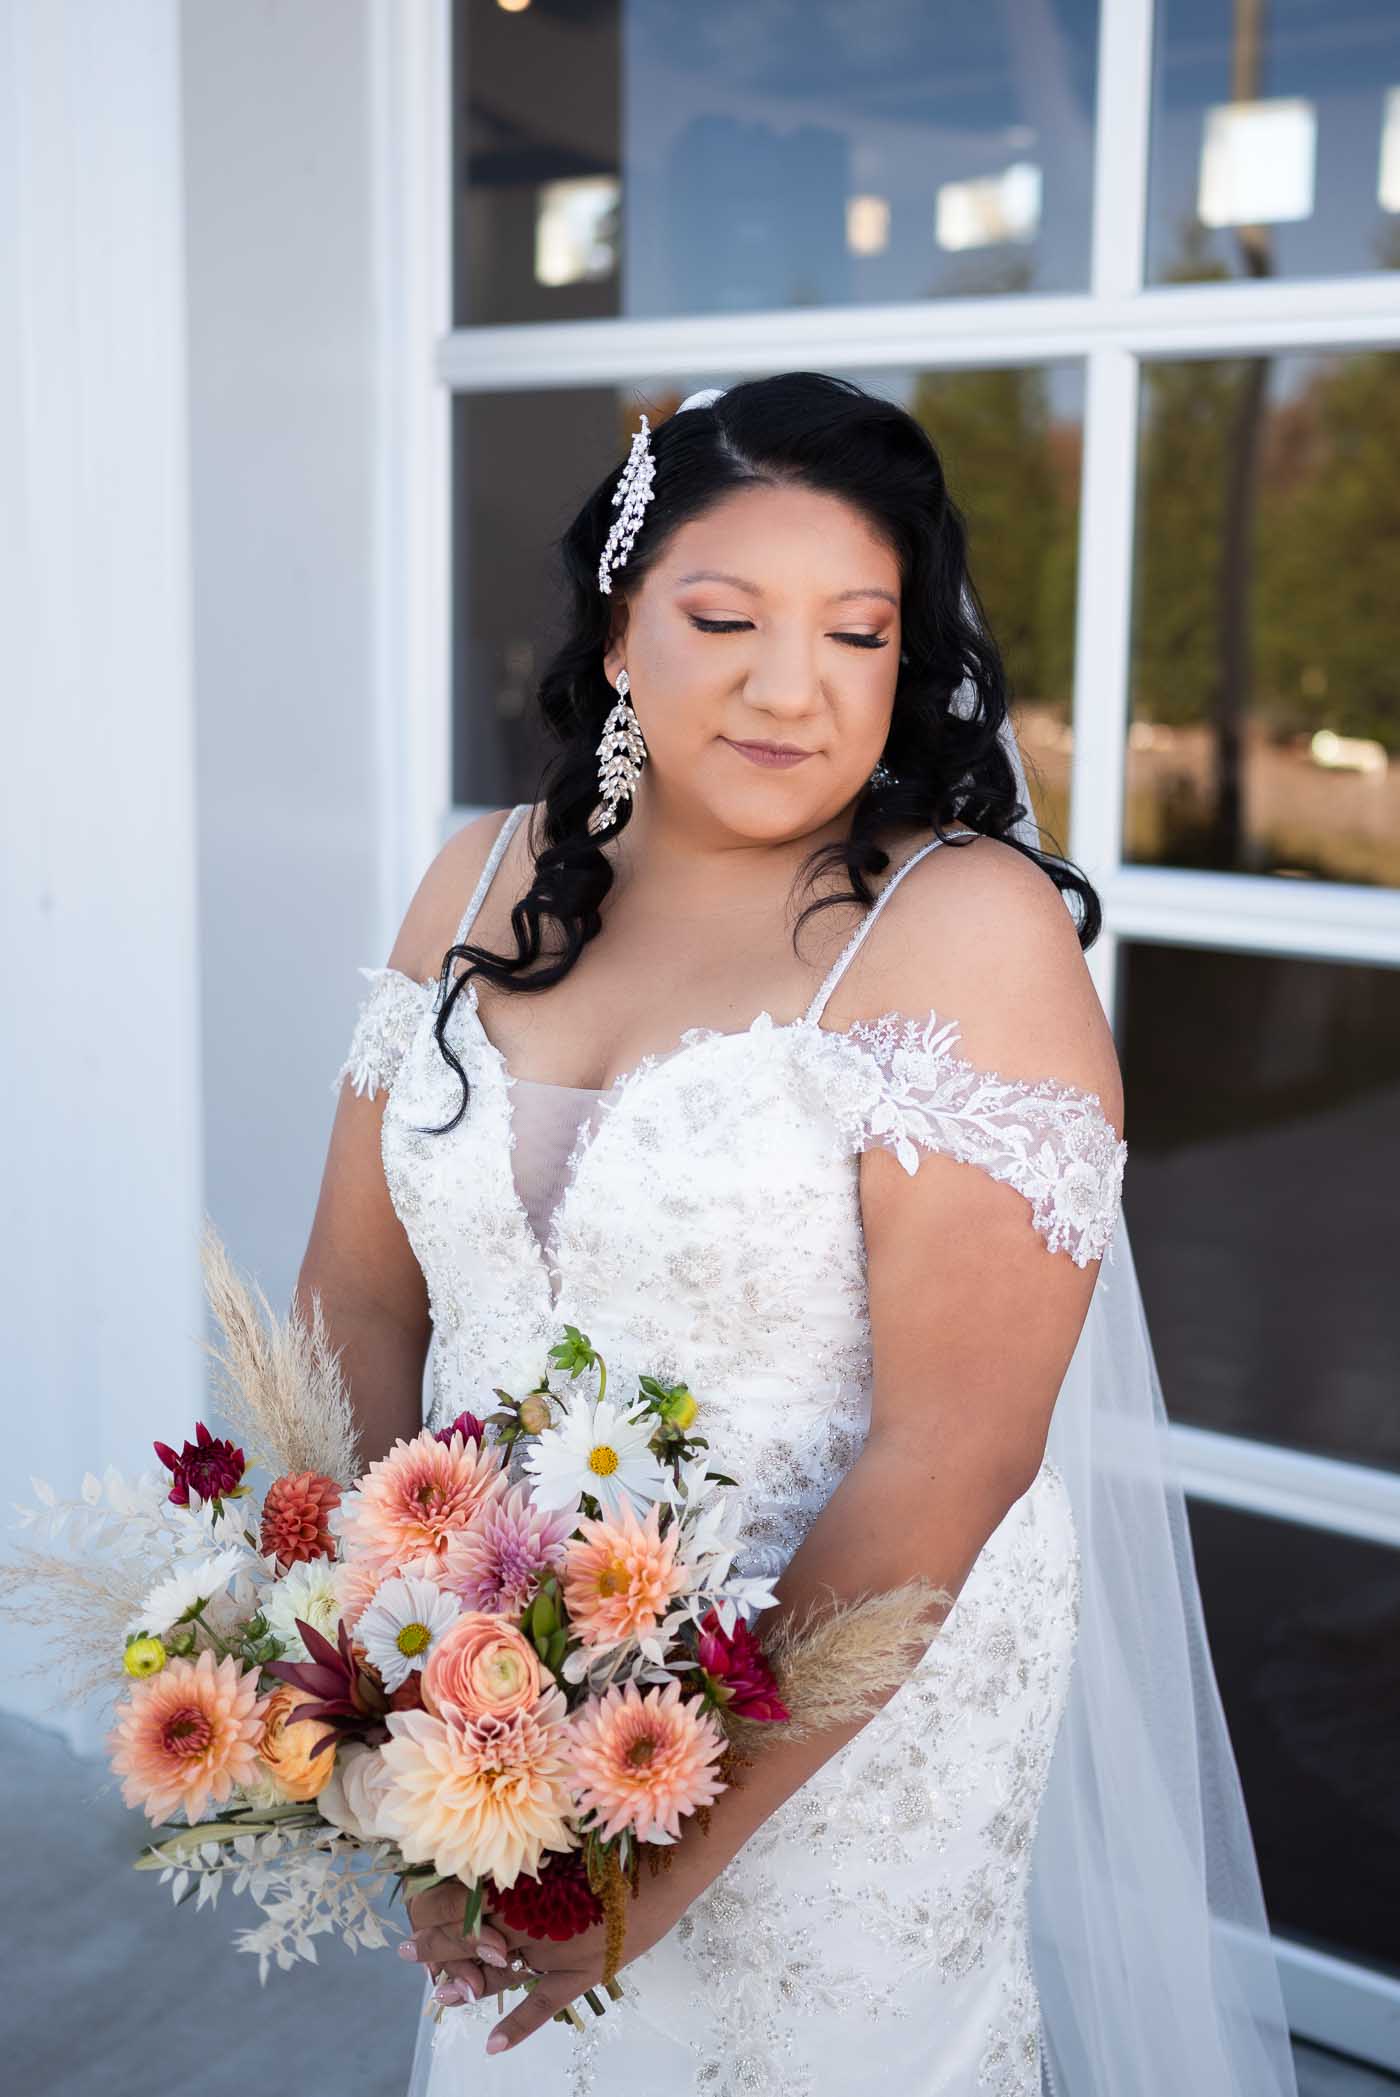 Bride glancing down at flowers